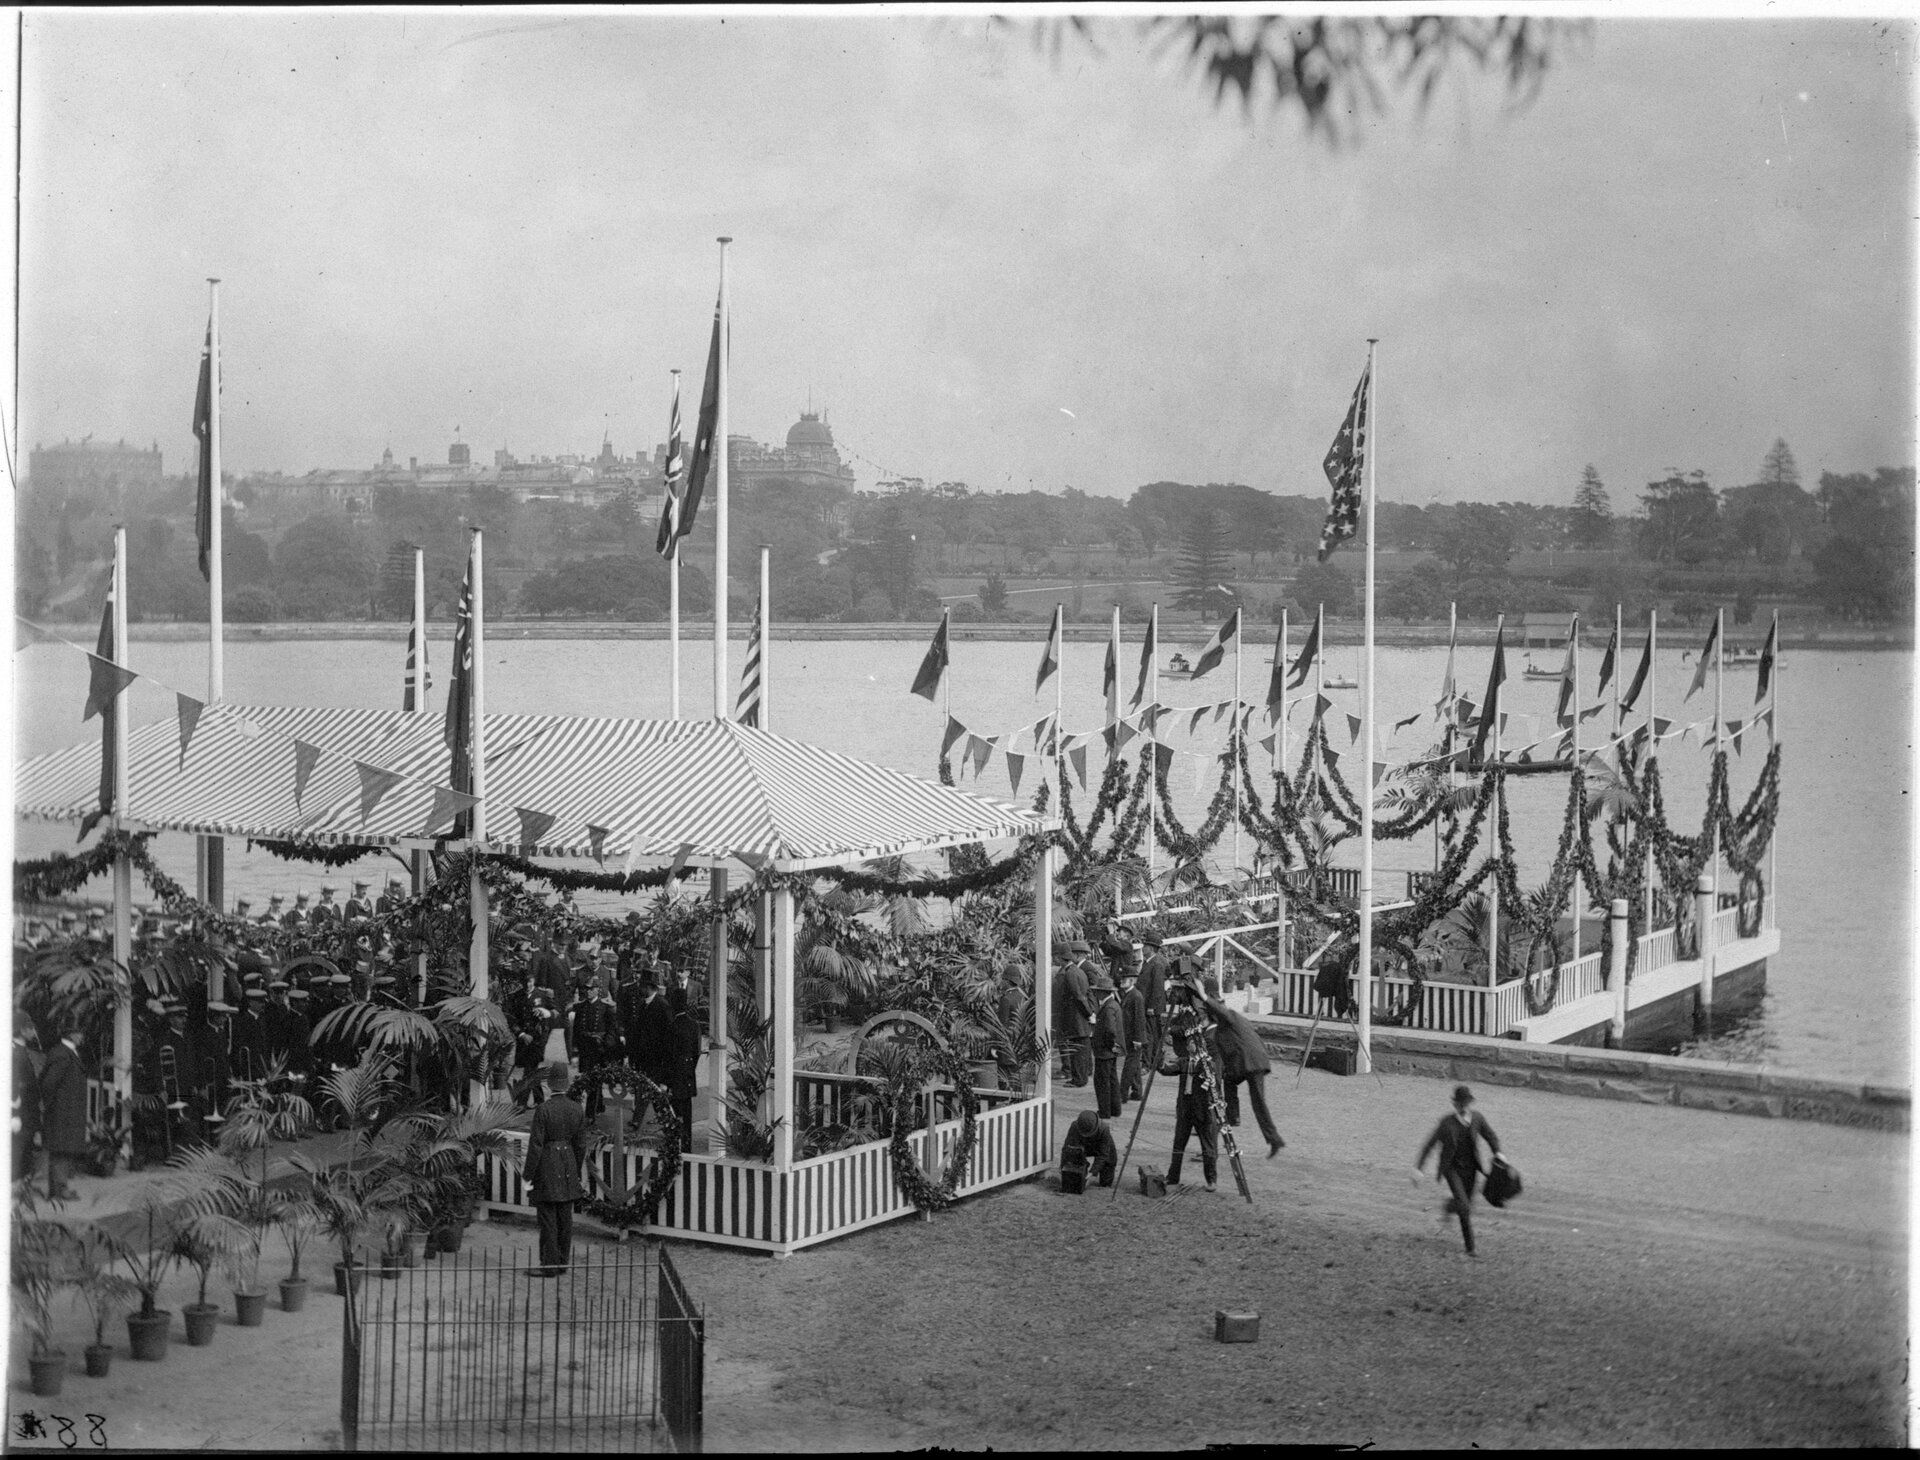  An official event at Sydney Harbour welcoming the US admiral of the Great White Fleet